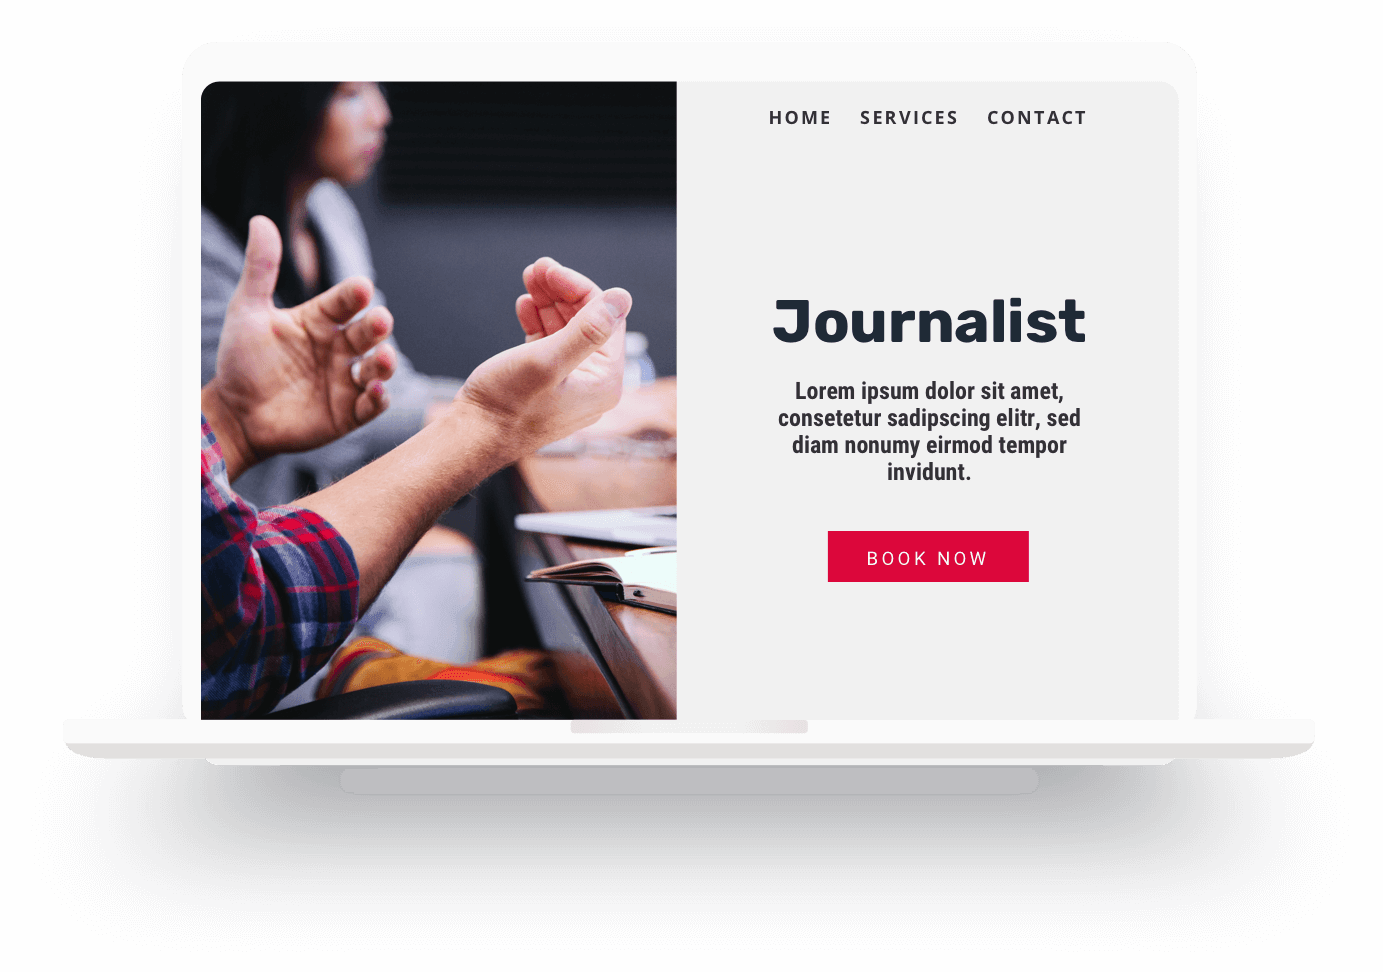 Example of a freelance journalist website built with Jimdo